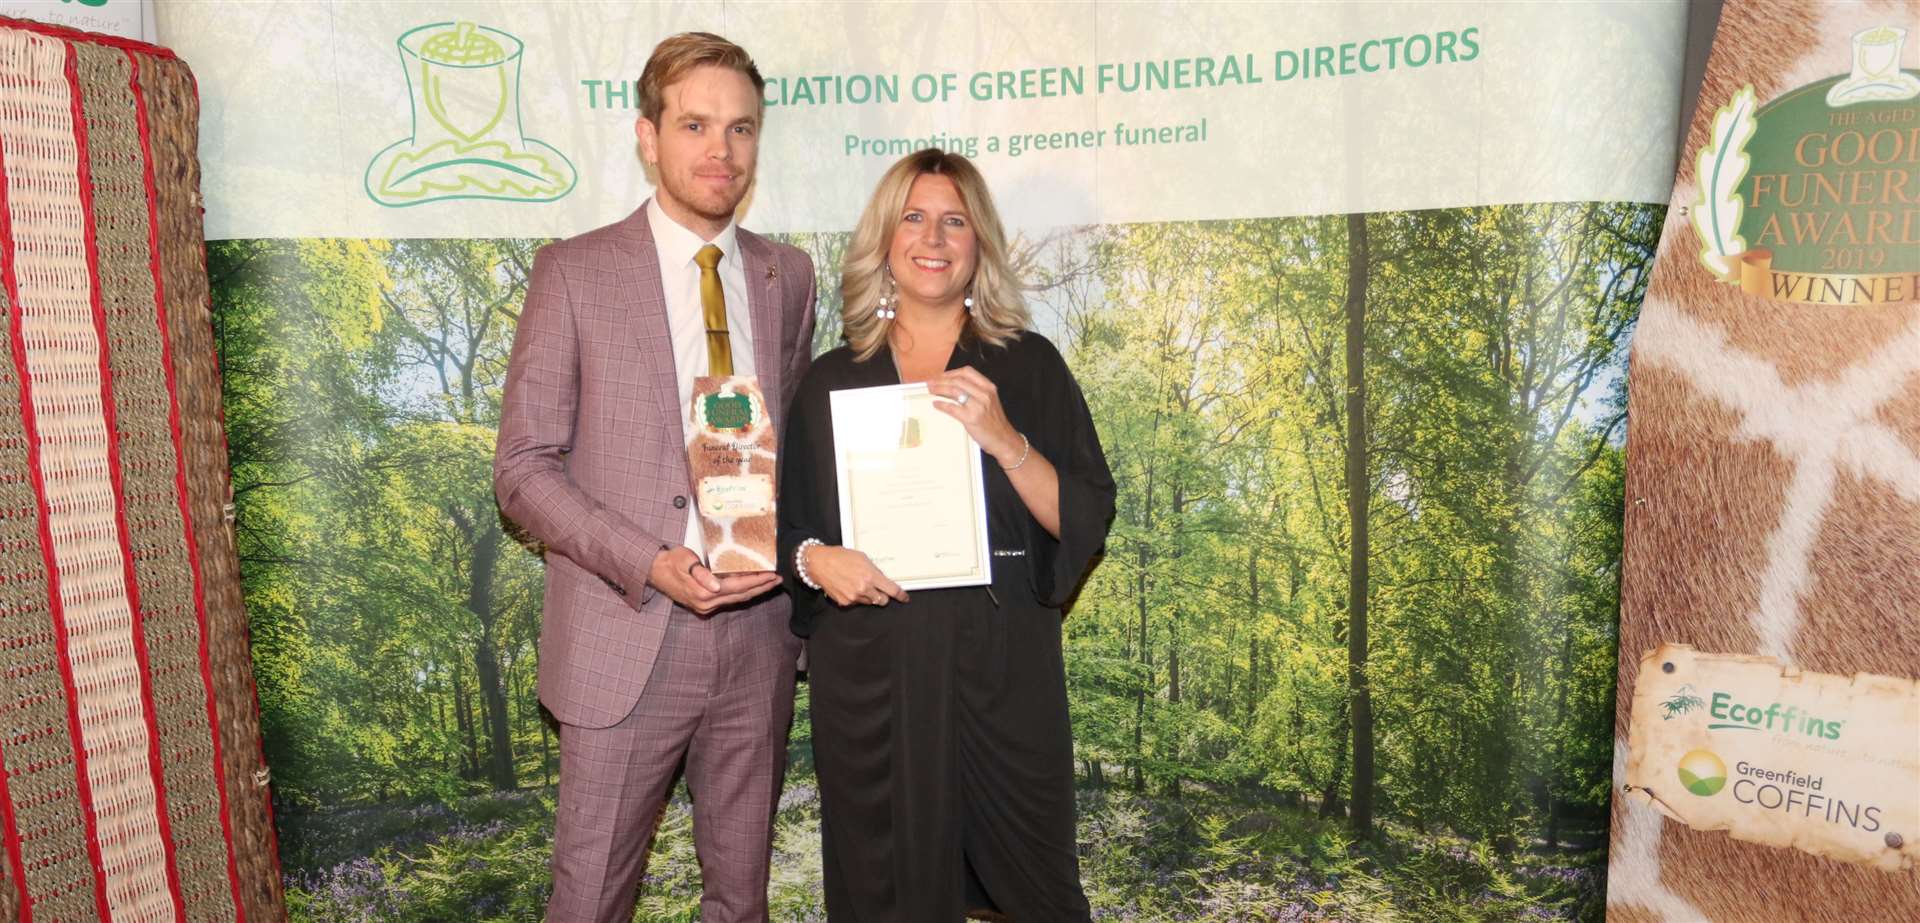 Albany Funerals recently picked up the AGFD Good Funeral Award for Funeral Director of the Year at a special event at Port Lympne Hotel and Reserve in Hythe.